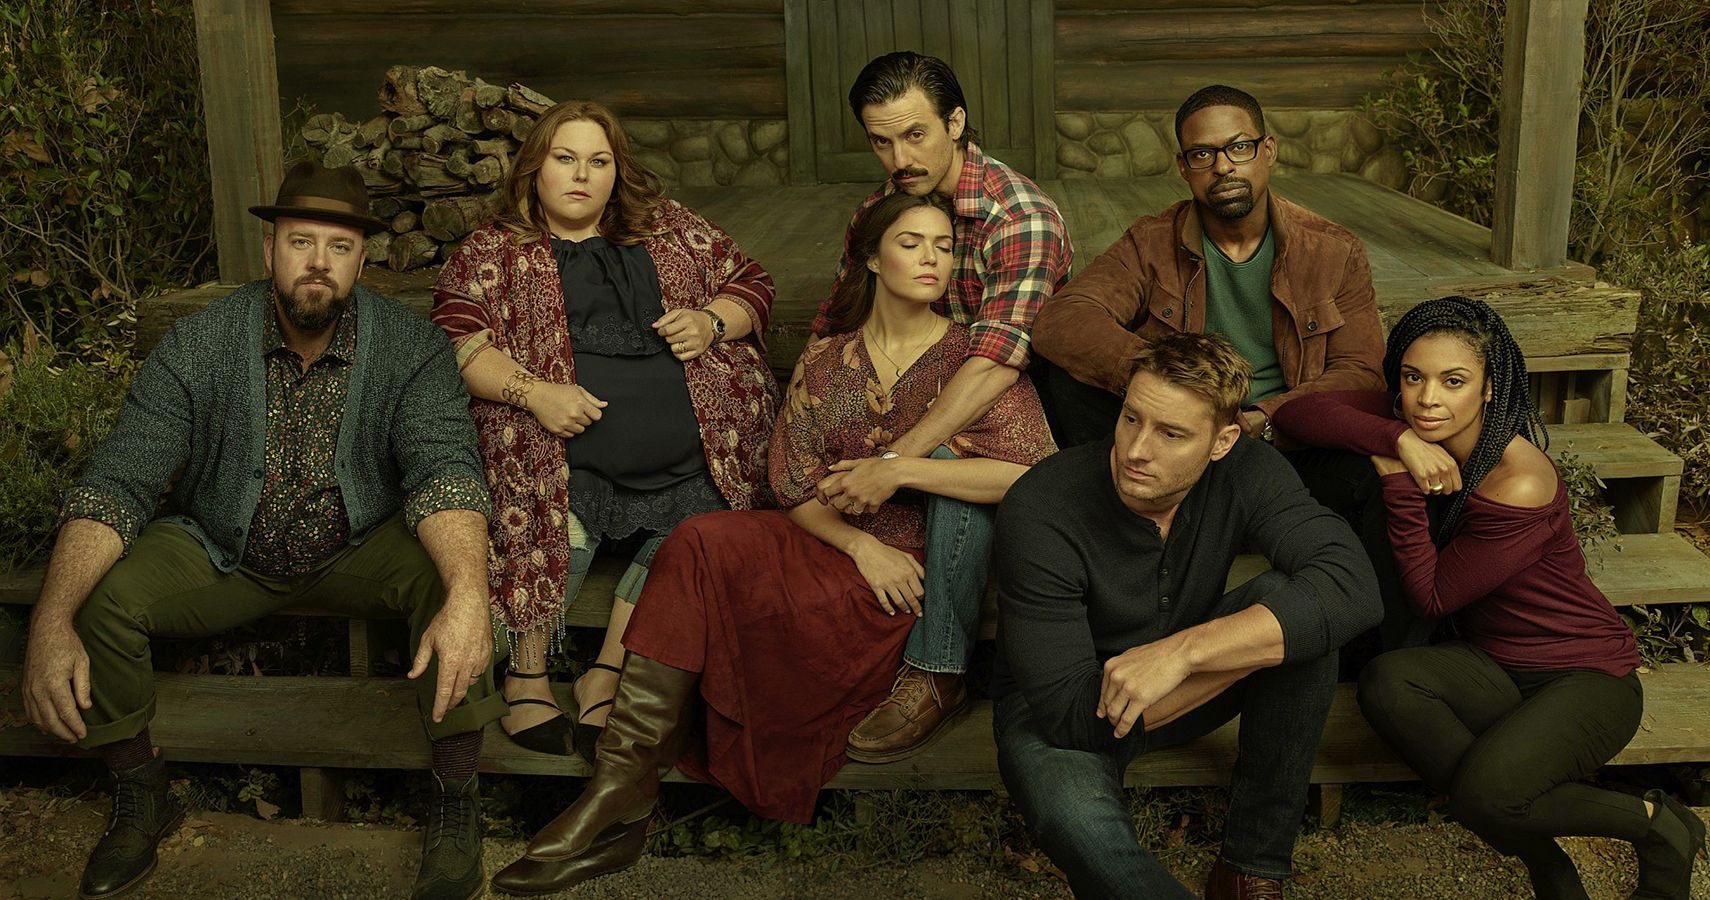 This Is Us 5 Things That Changed After The Pilot (& 5 That Stayed The Same)